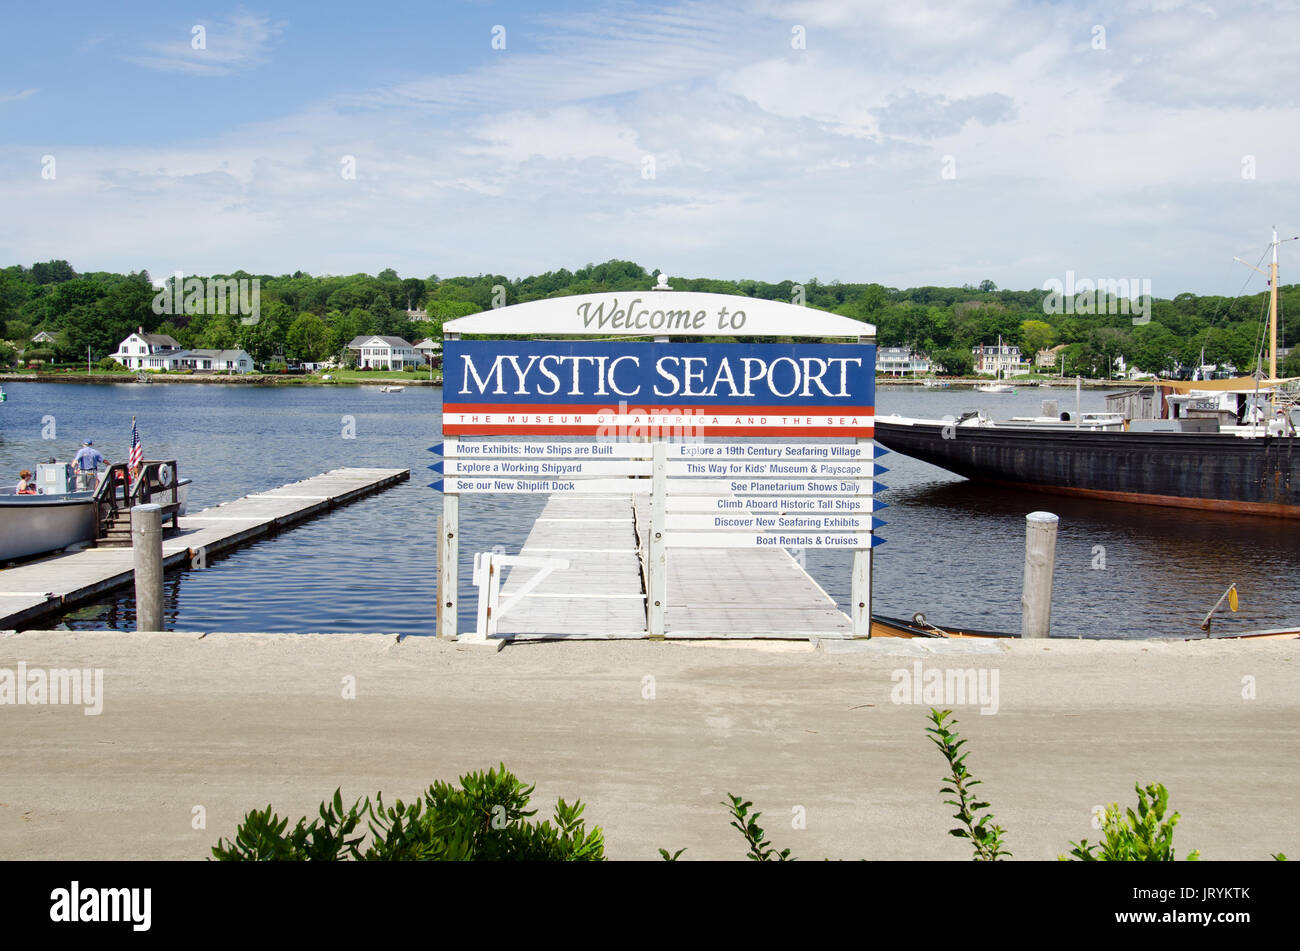 Welcome to Mystic Seaport sign at Mystic Harbor, Mystic CT USA Stock Photo